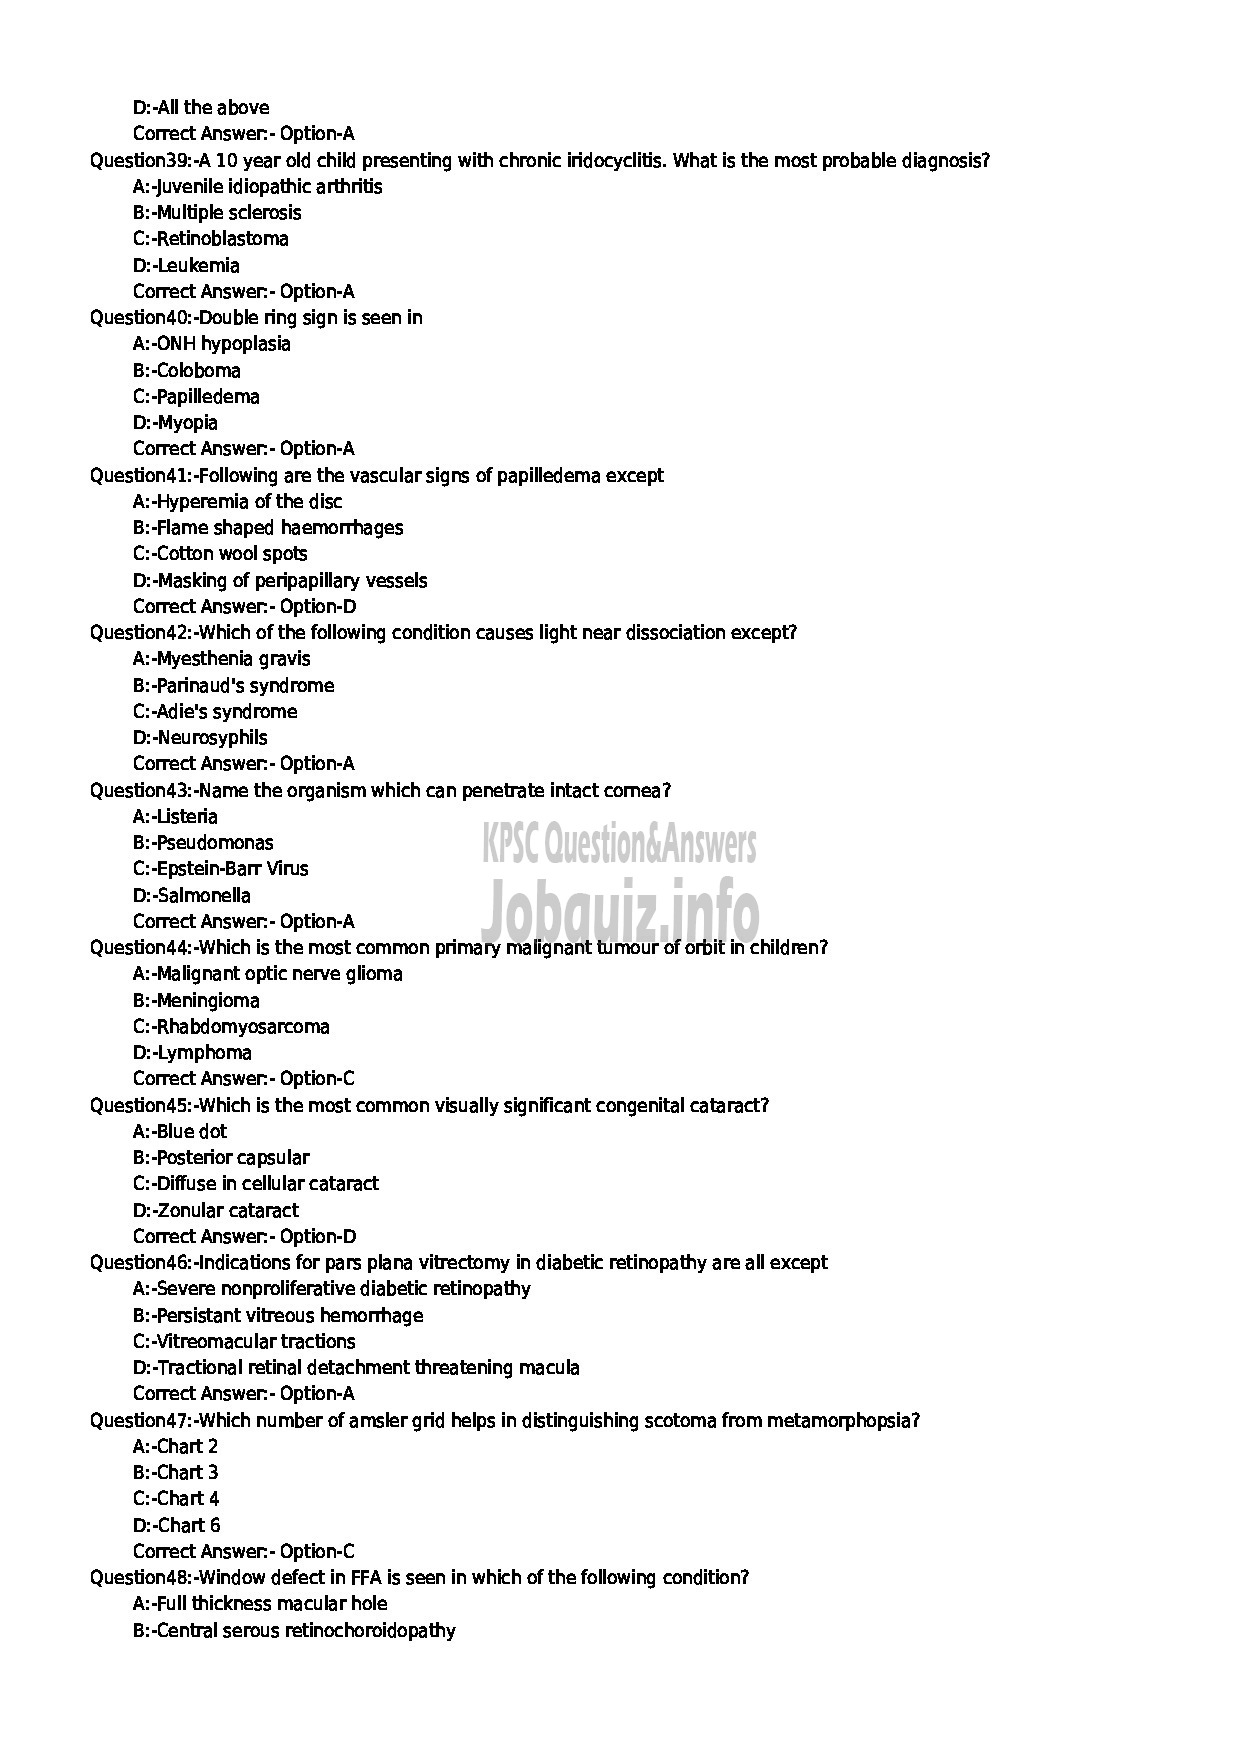 Kerala PSC Question Paper - SENIOR LECTURER IN OPTHALMOLOGY NCA MEDICAL EDUCATION-5